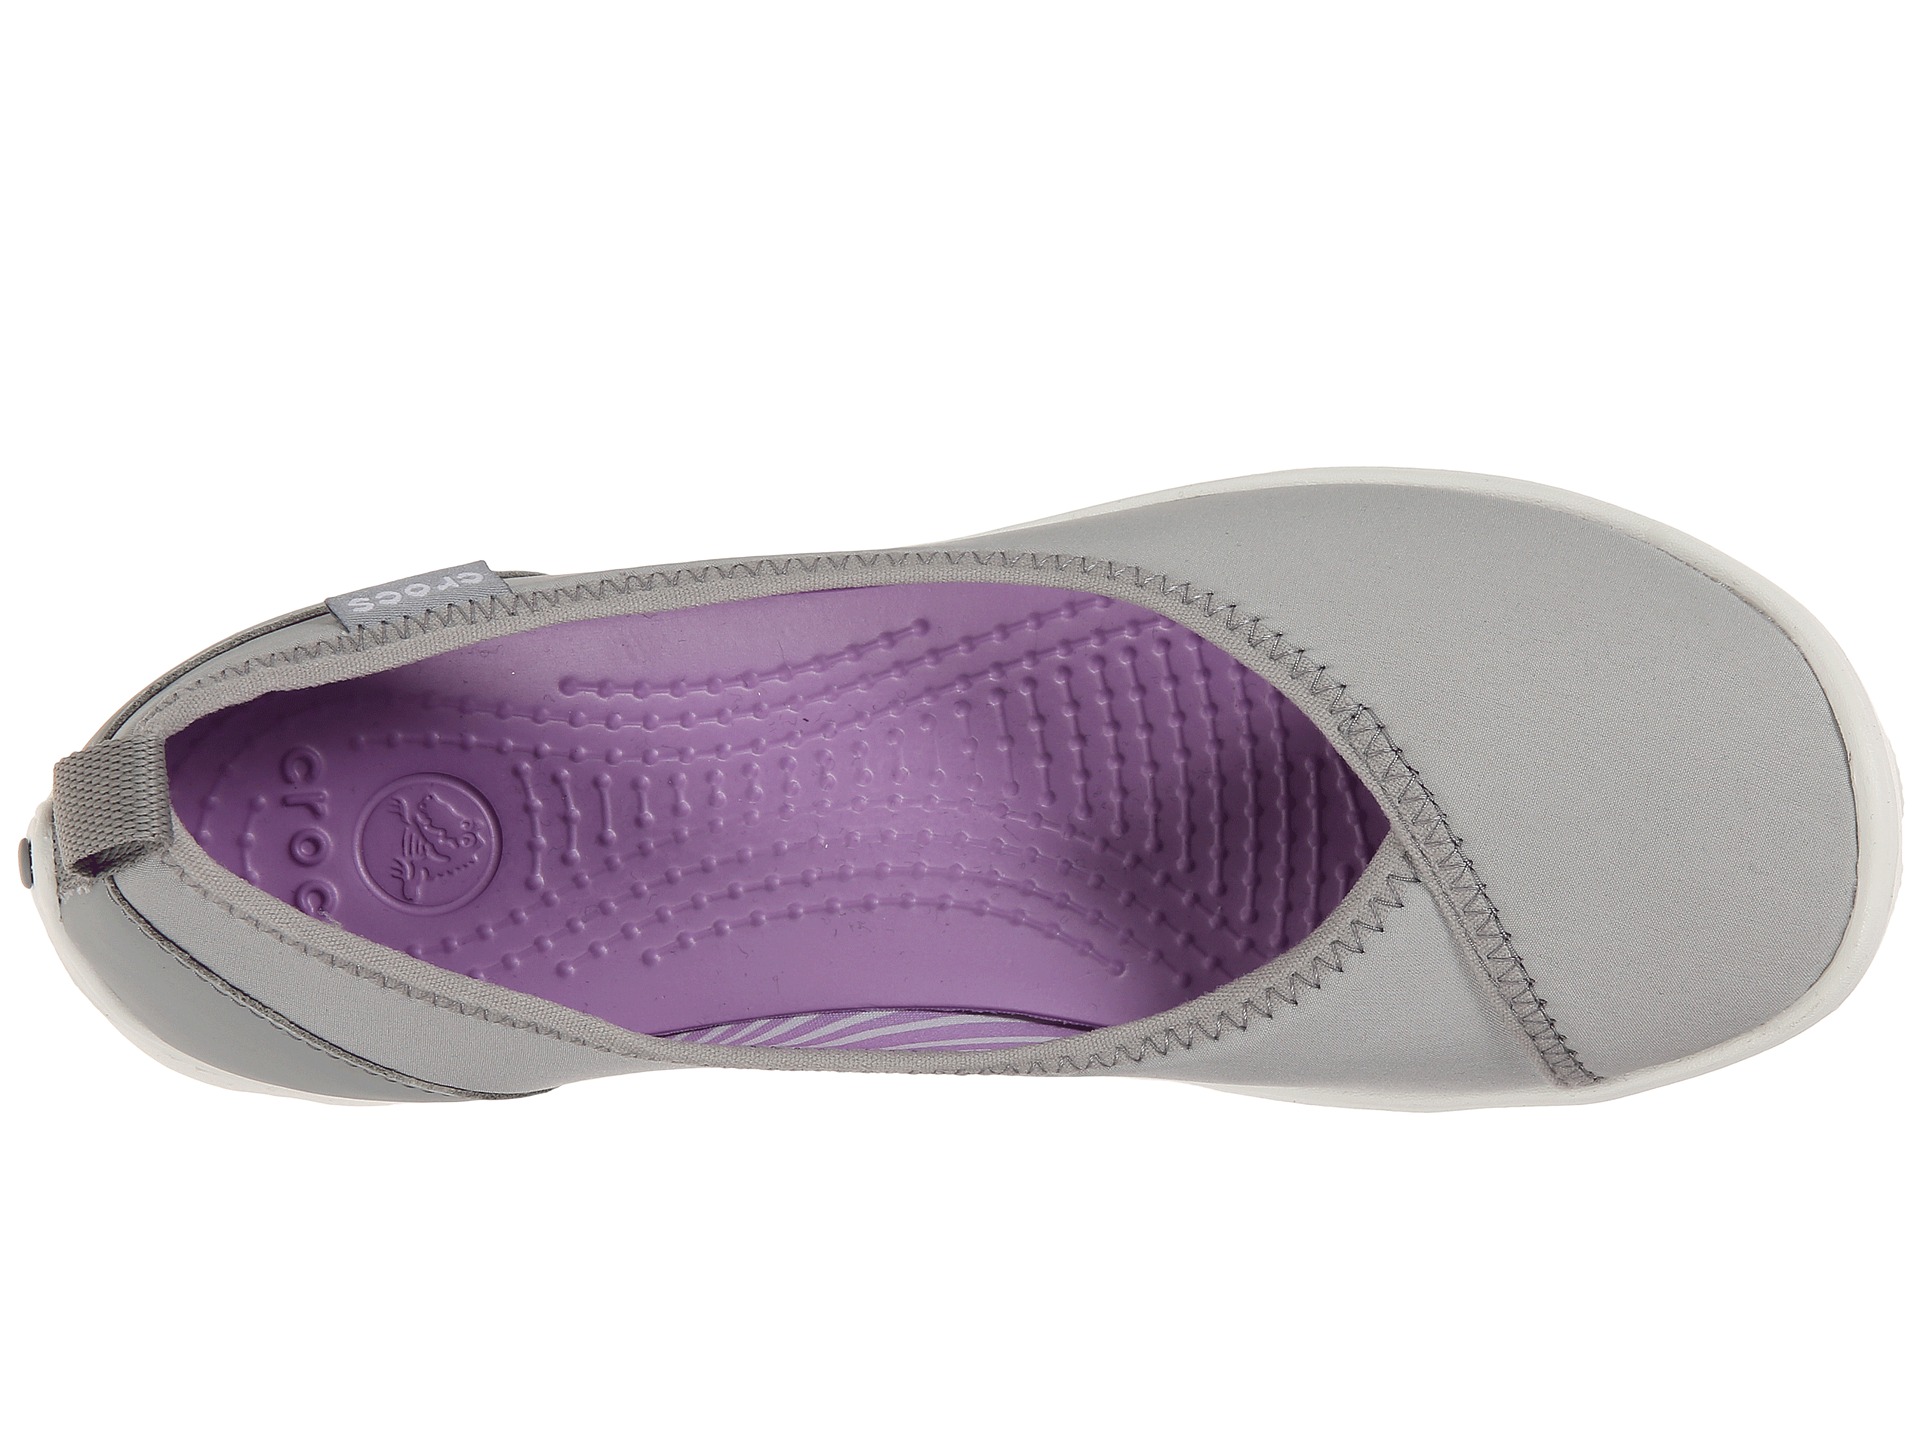 Crocs Duet Busy Day Flat Light Grey/White - Zappos.com Free Shipping